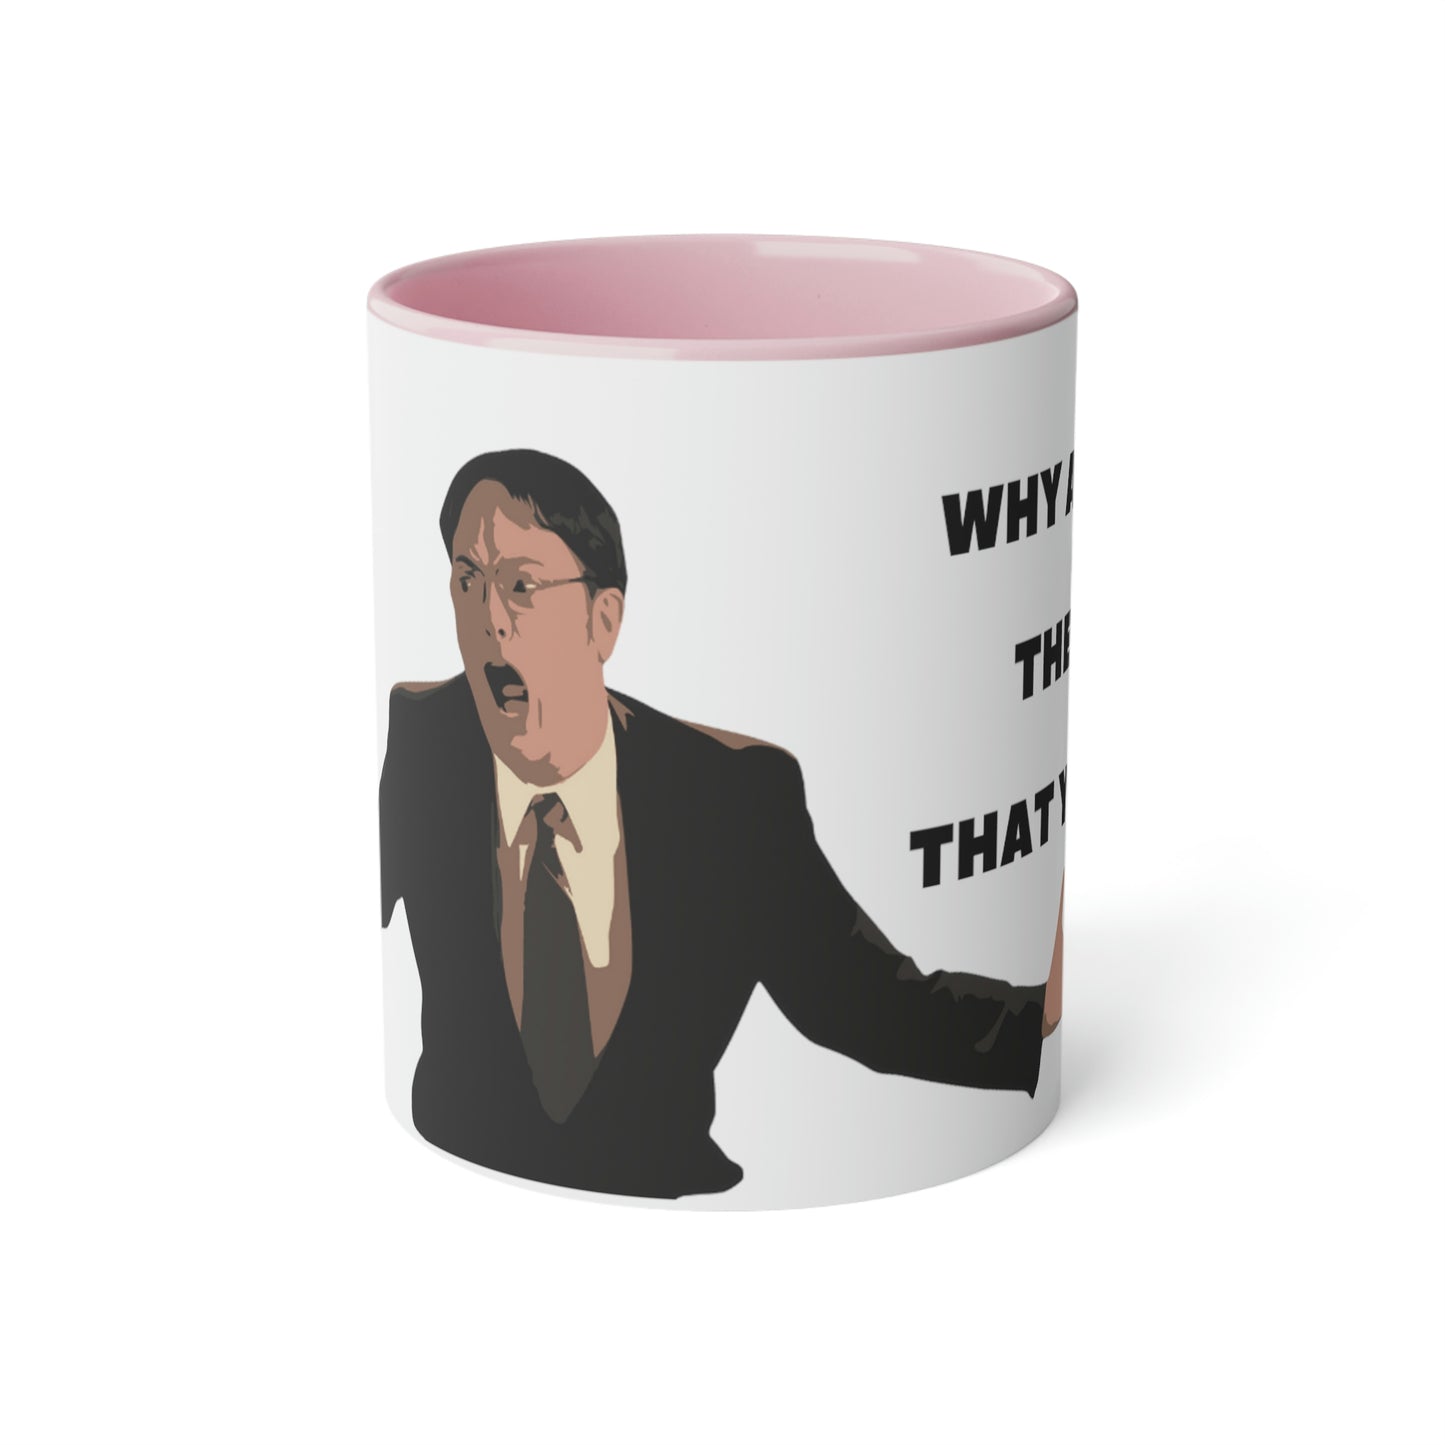 Meme Mug Dunder Mifflin workplace comedy - Why are you the way that you are?